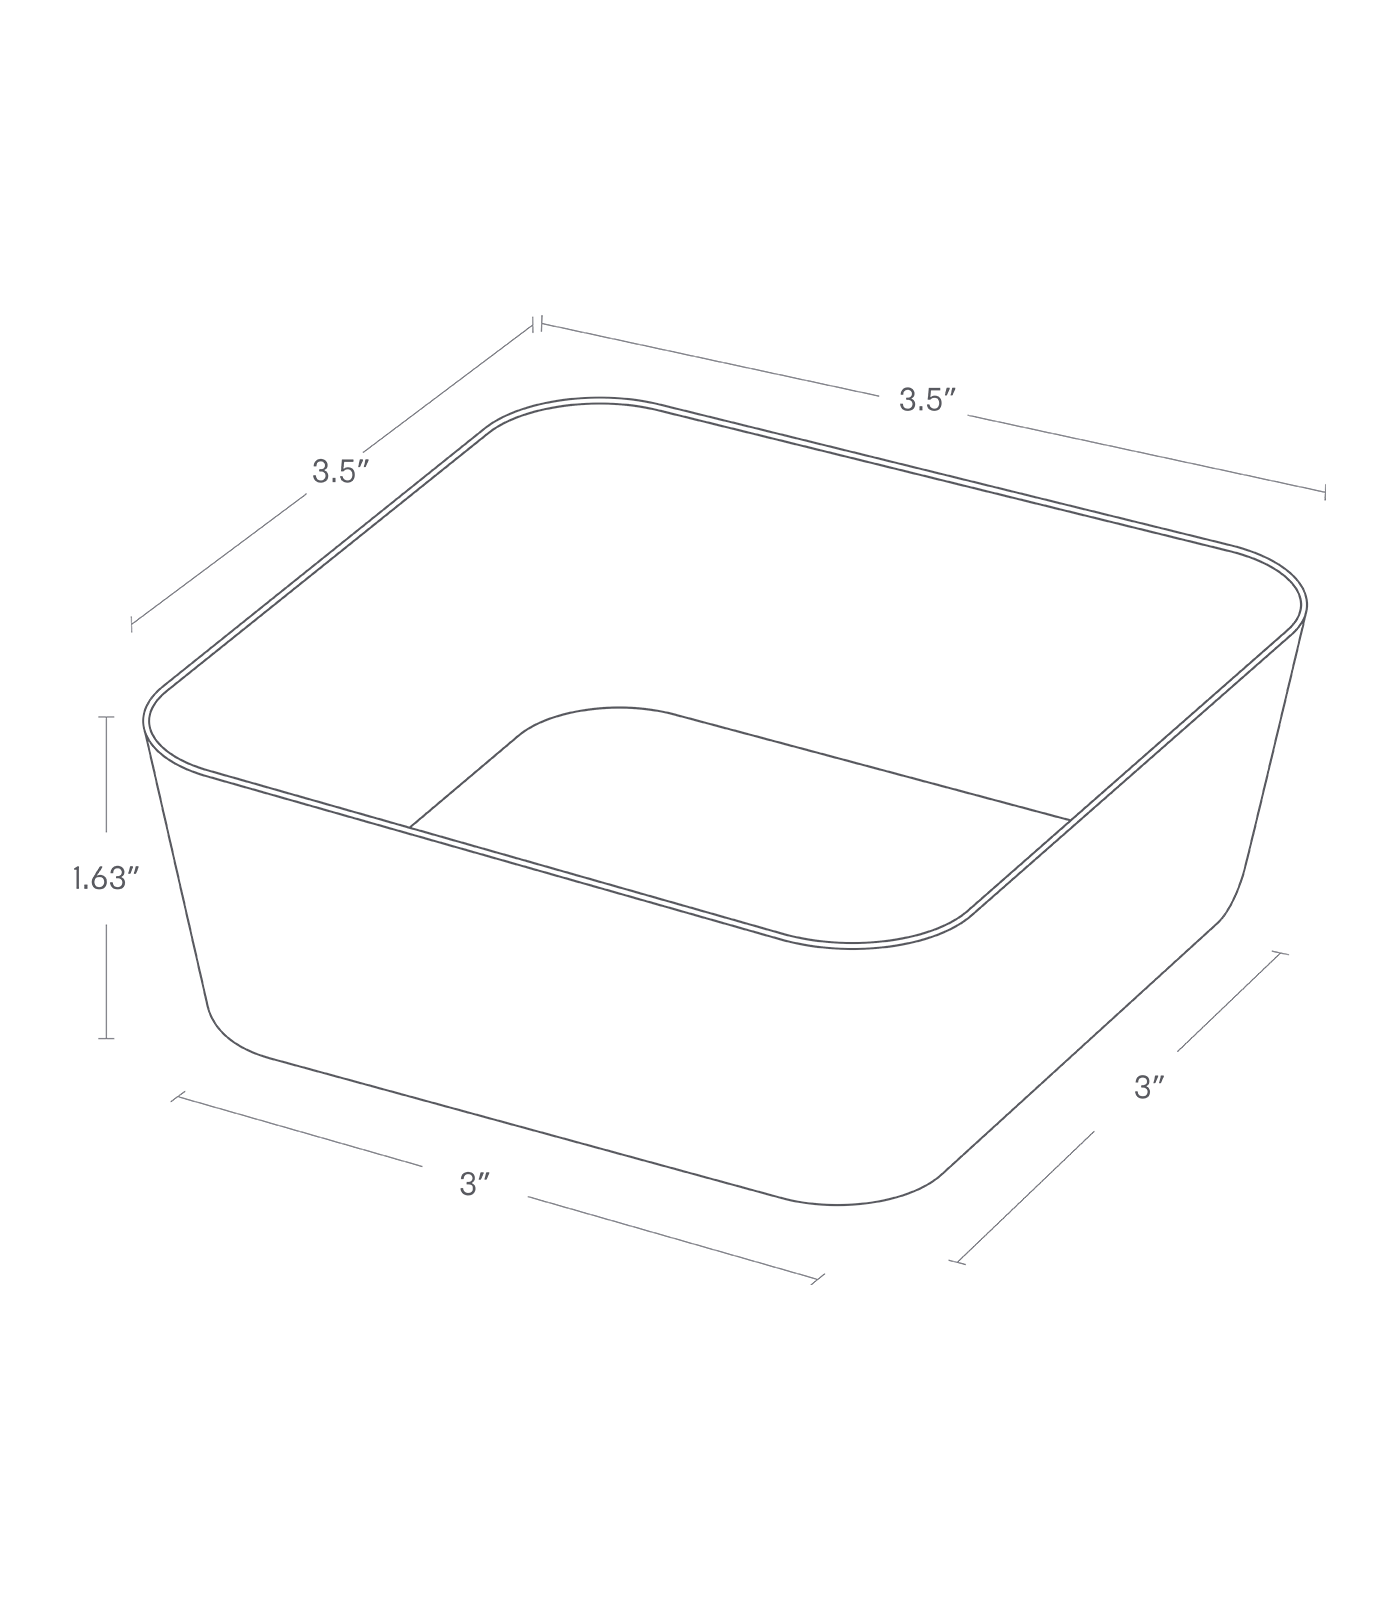 Dimension image for Vanity Tray - Flat - Two Sizes on a white background including dimensions  L 3.54 x W 3.54 x H 1.57 inches